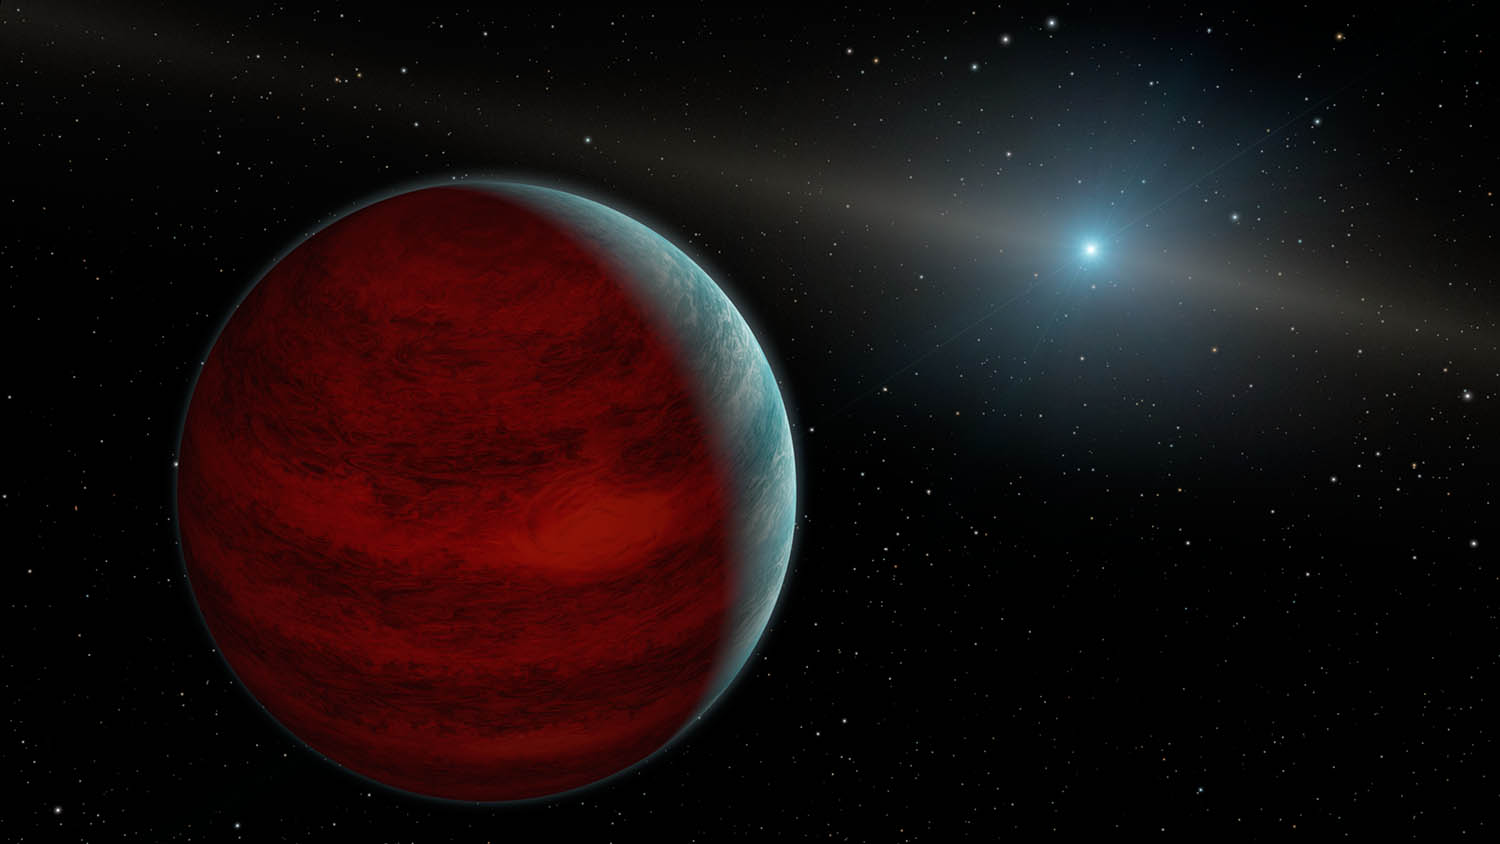 Artist's depiction of a Jupiter-sized planet in orbit around a white dwarf. Incredibly, the two objects in the image are actually close to scale, as white dwarfs are roughly the size of Earth.  (Image: NASA/JPL)